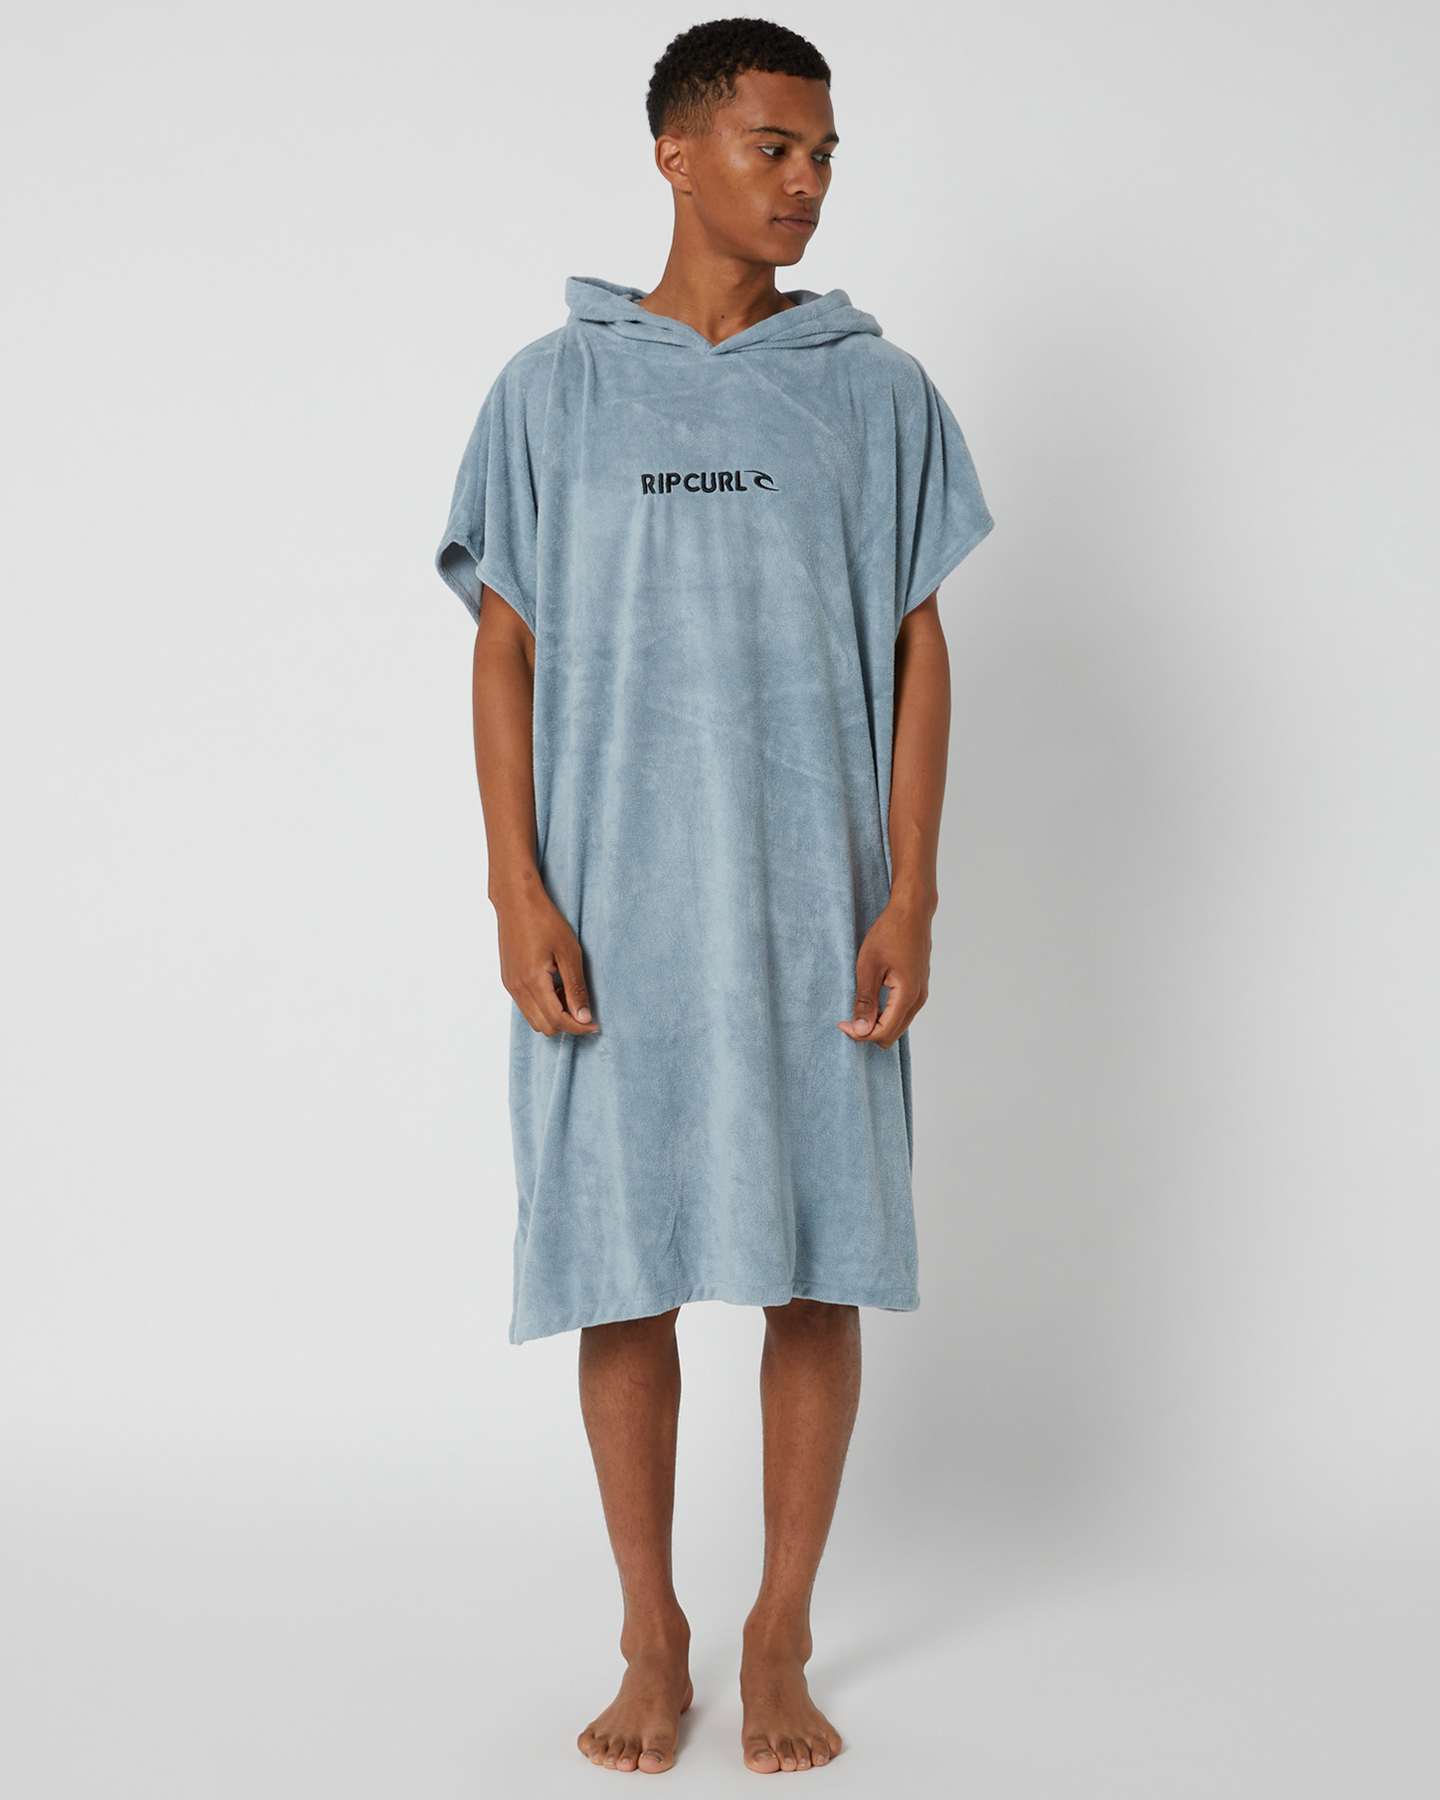 Procent ophobe samlet set Rip Curl Brand Hooded Towel - Dusty Blue | SurfStitch